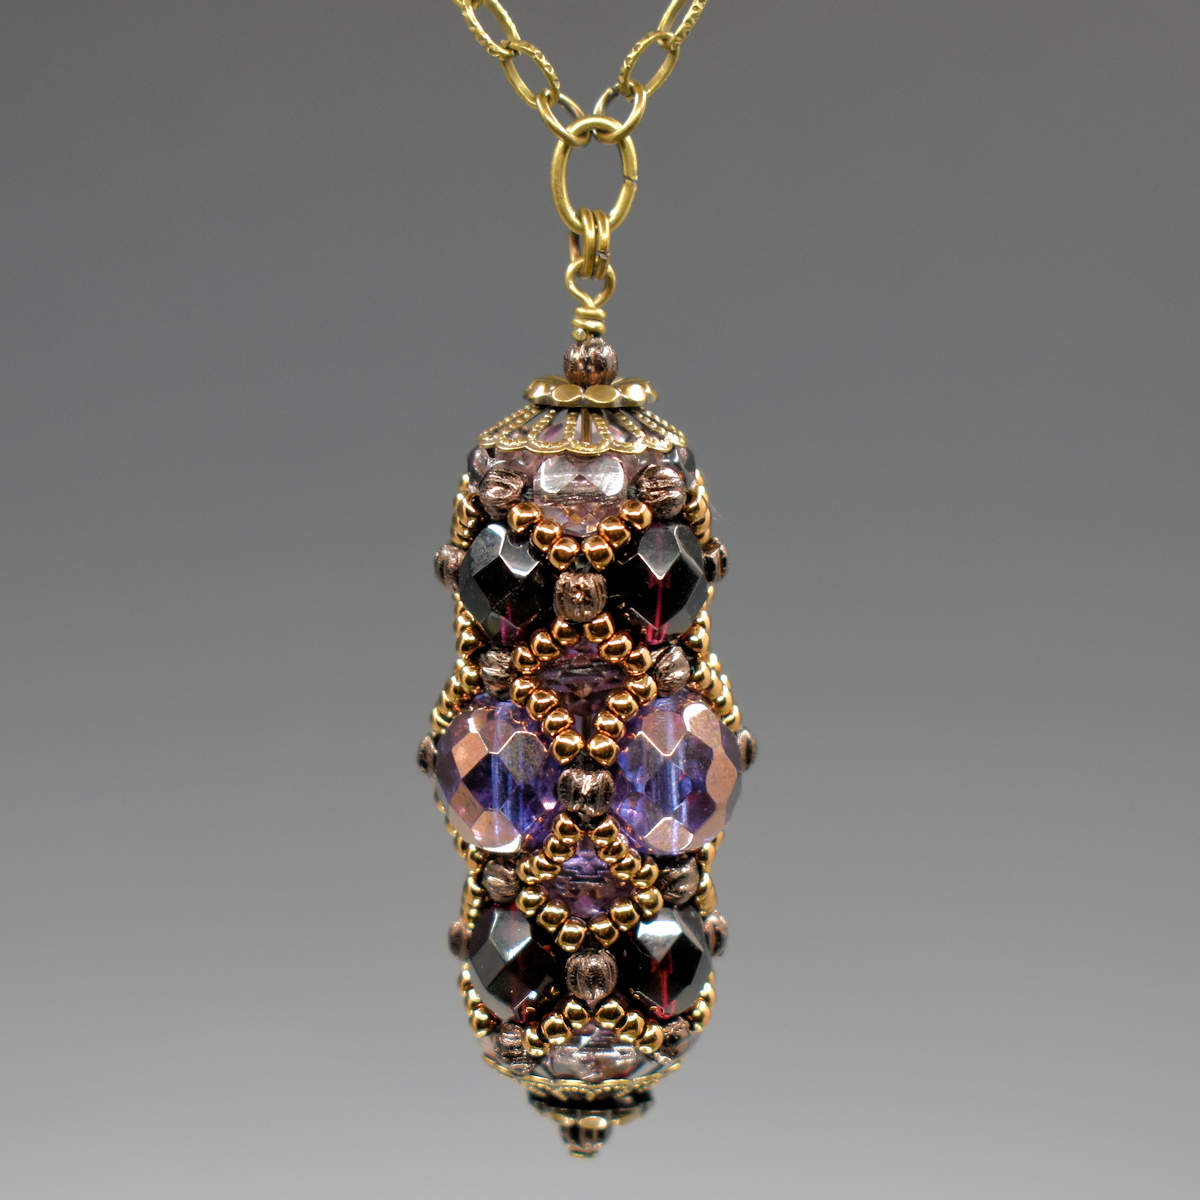 A purple and gold beaded pedant on gold colored chain. The pendant has larger light purple faceted beads in the center row and darker, warmer purple beads in the rows on either side. The whole pendant is overlaid with a netting of gold seed beads and capped with filigree style gold colored metal.